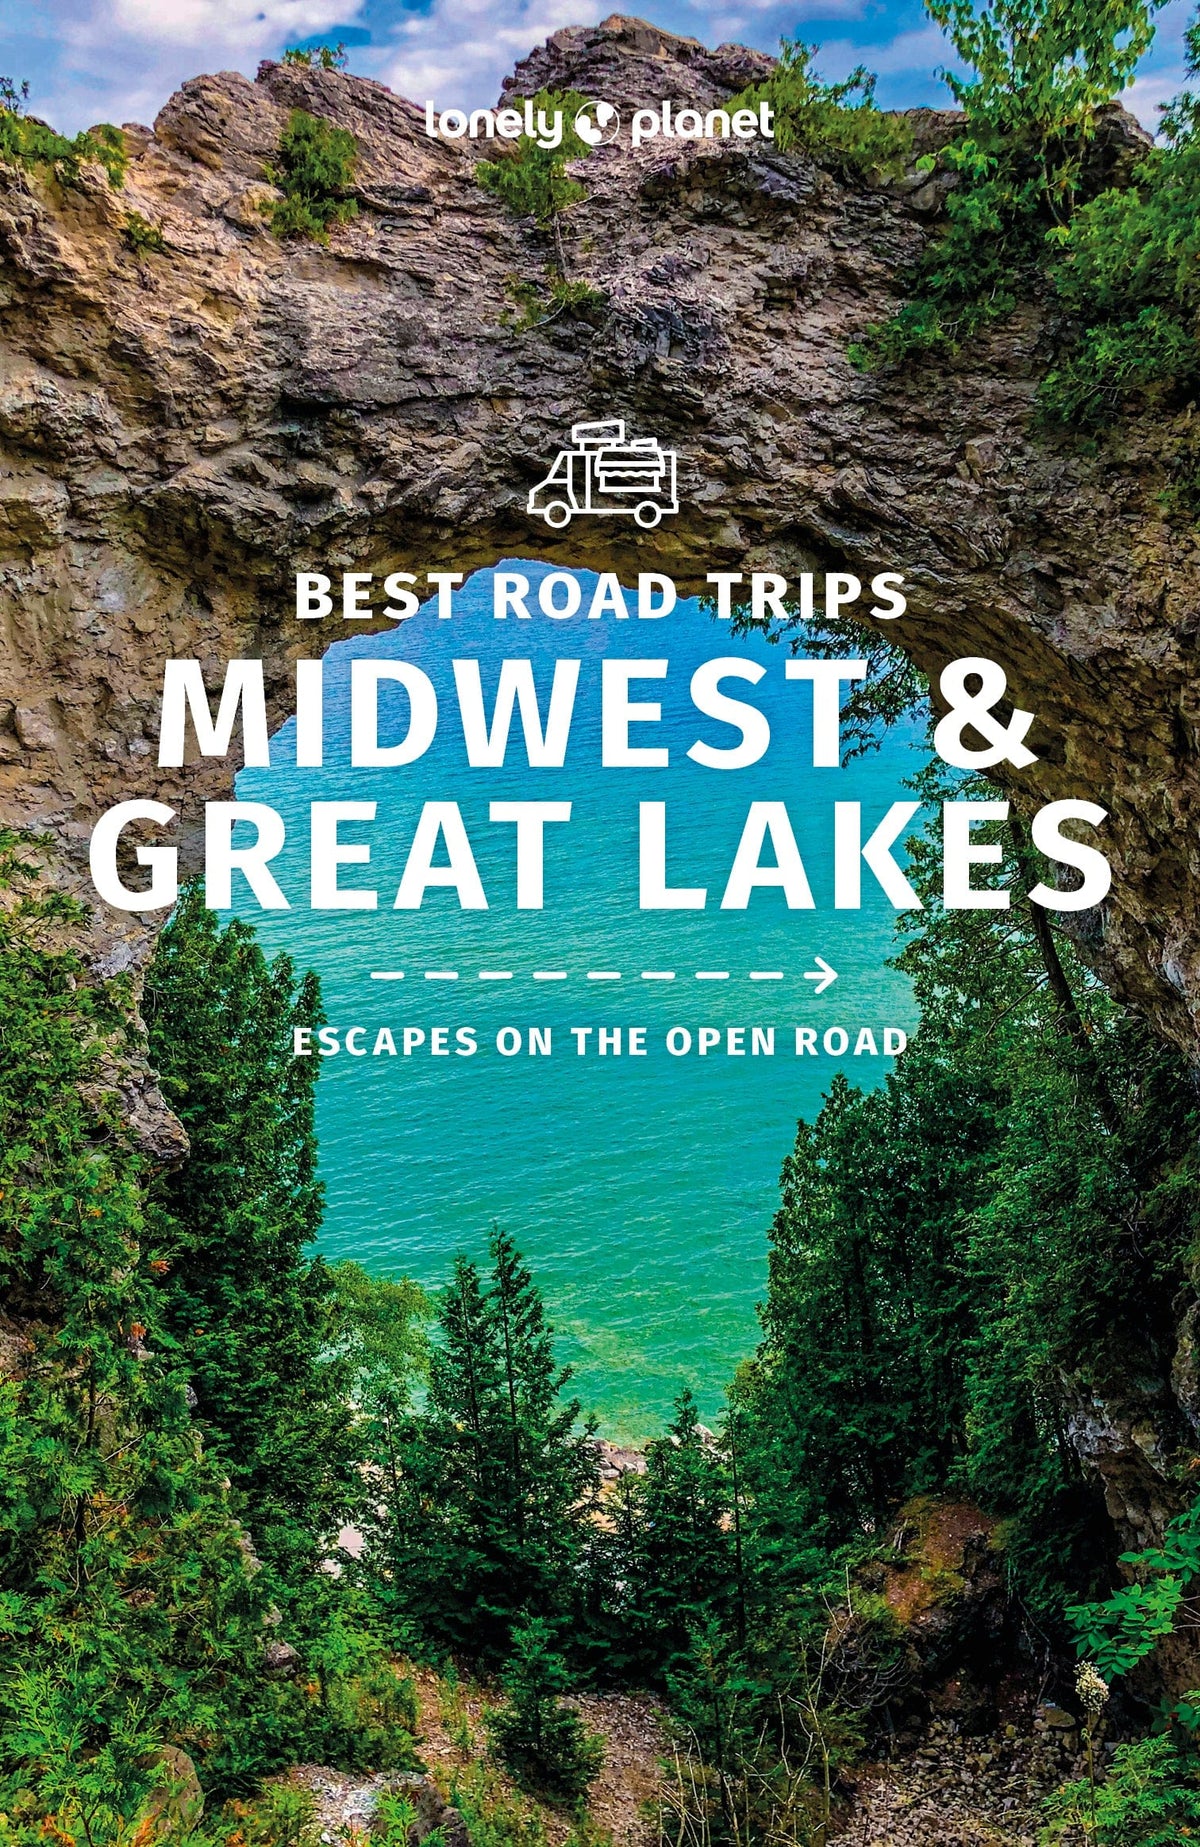 best-road-trips-midwest-great-lakes-lonely-planet